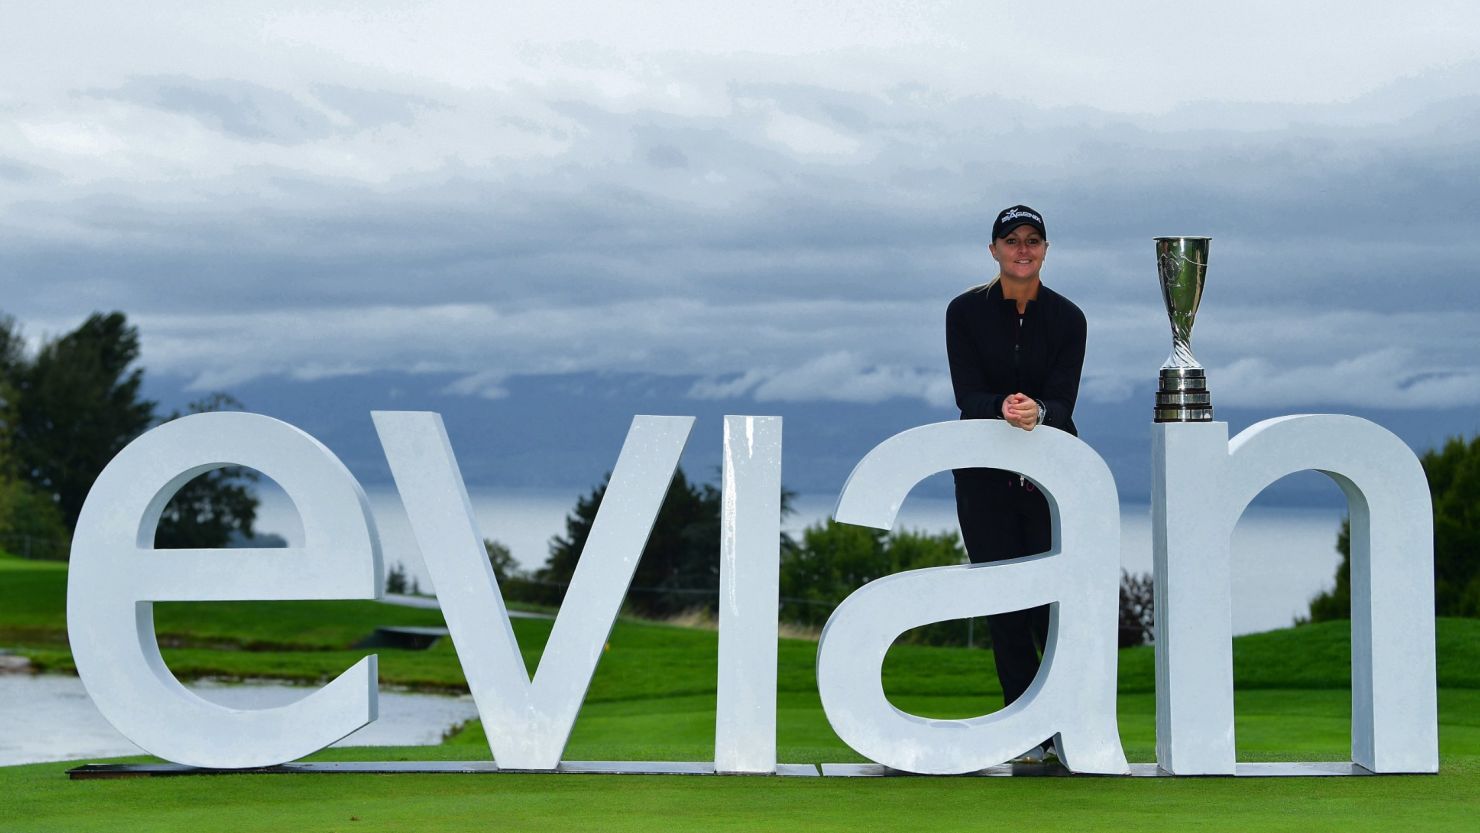 Sweden's Anna Nordqvist poses with the Evian Championship trophy after her playoff win in France.